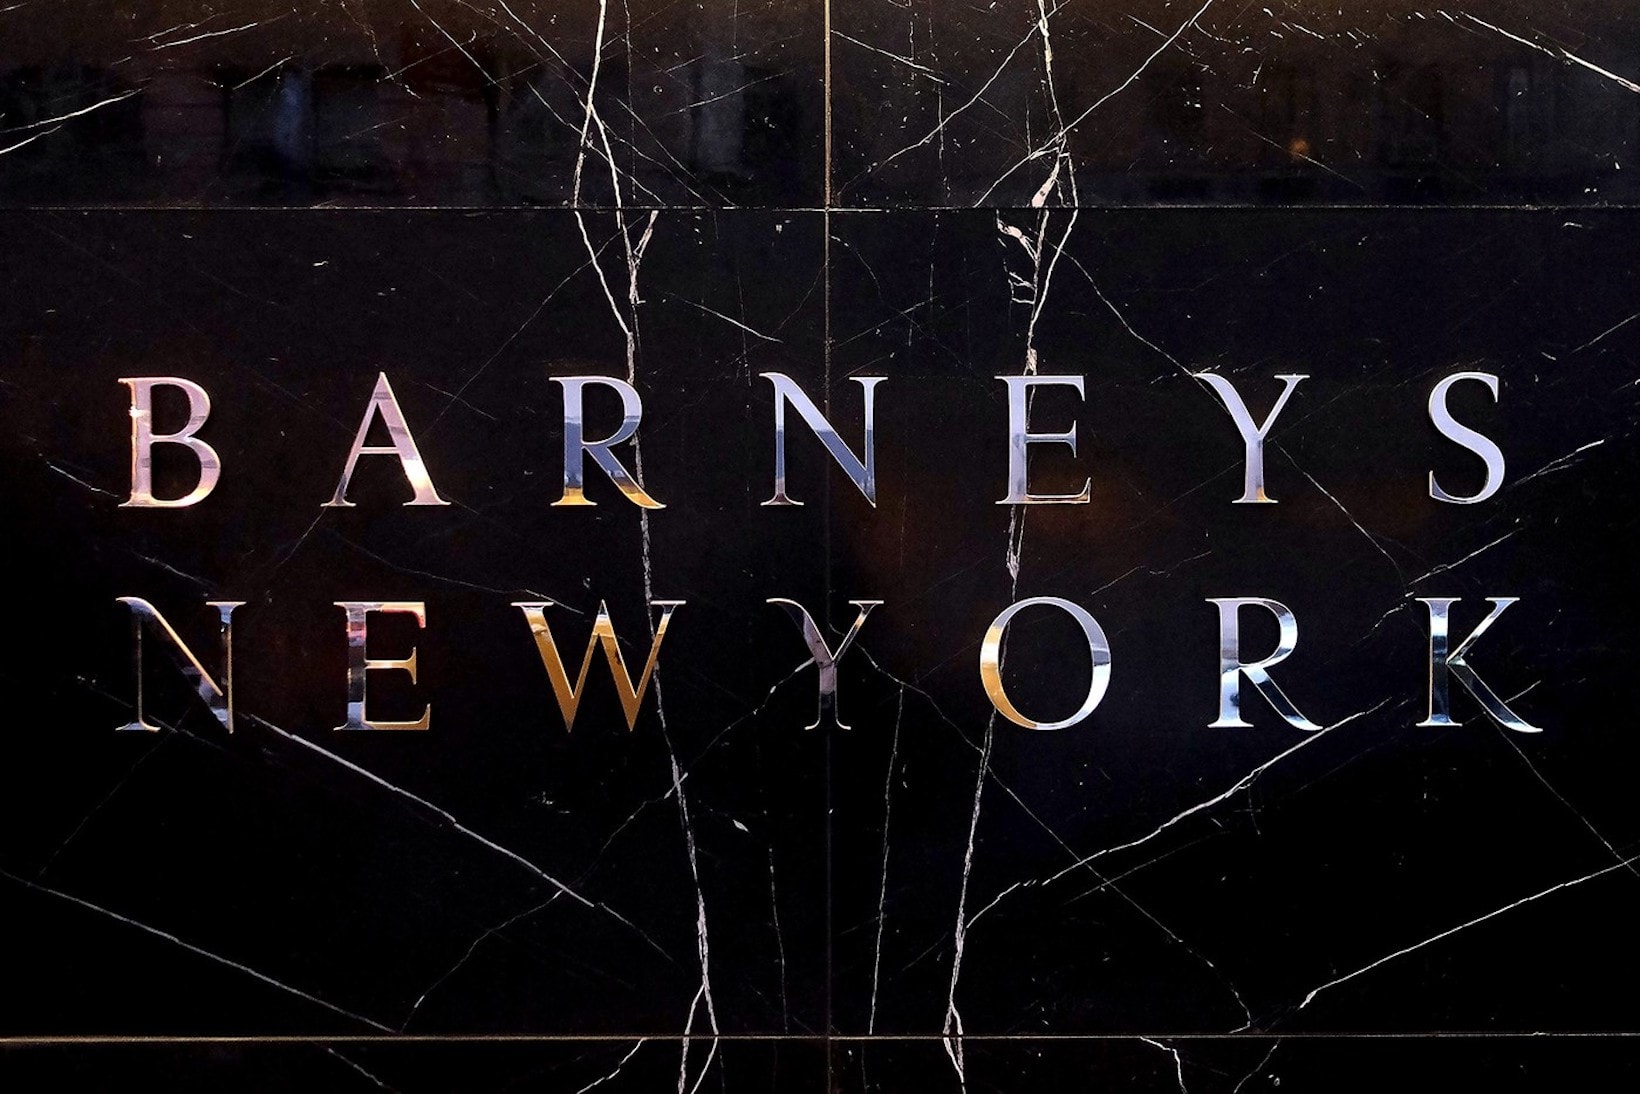 barneys new york sold licensing firm authentic brands group luxury retailer department store